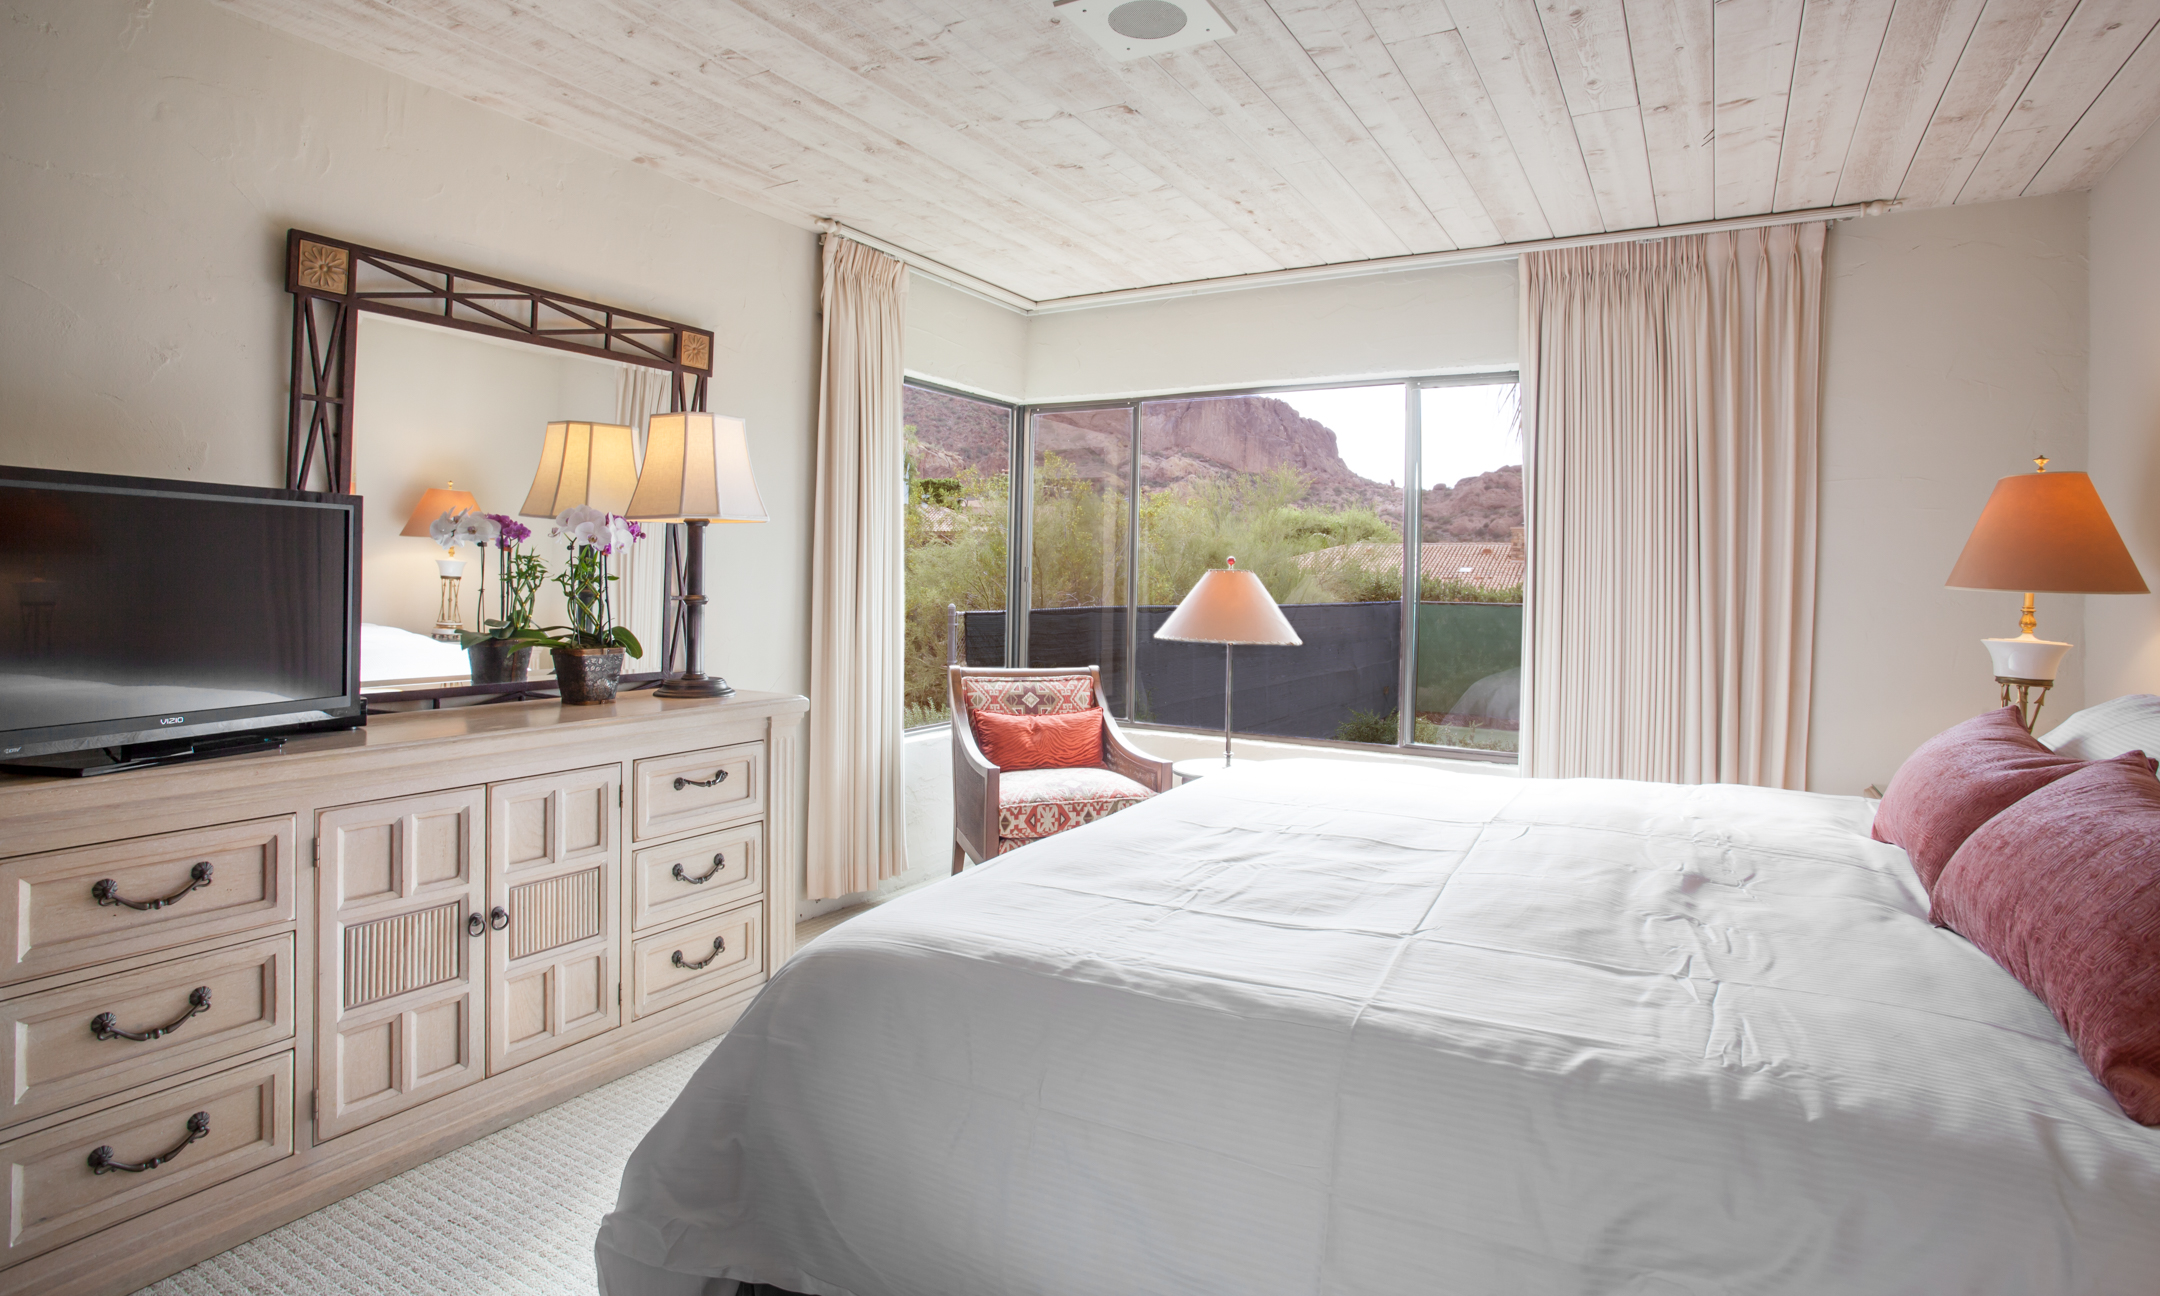 Villa Norte master bedroom with king bed, television and view of Camelback Mountain.